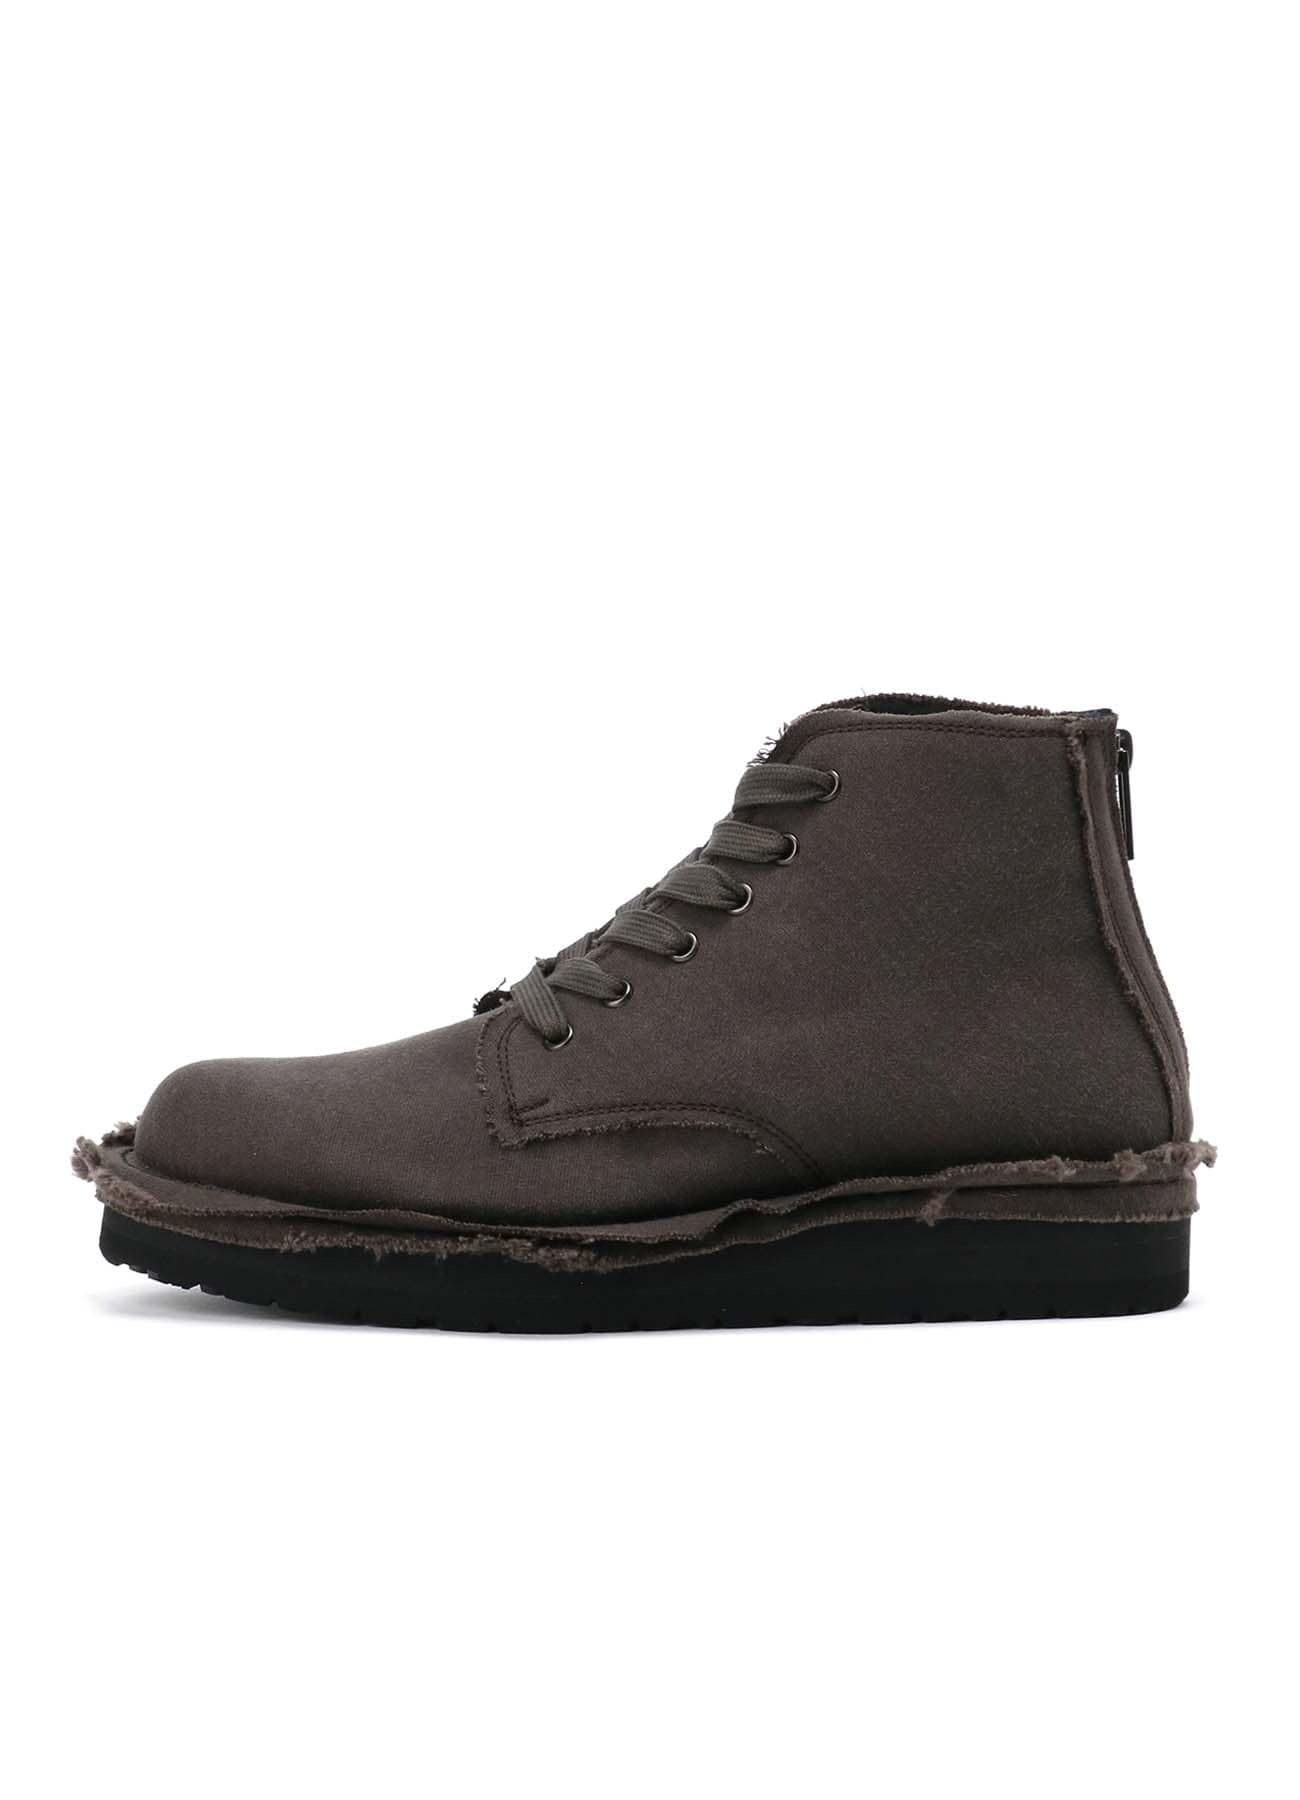 WHIPCORD LACE UP BOOTS WITH ZIP	